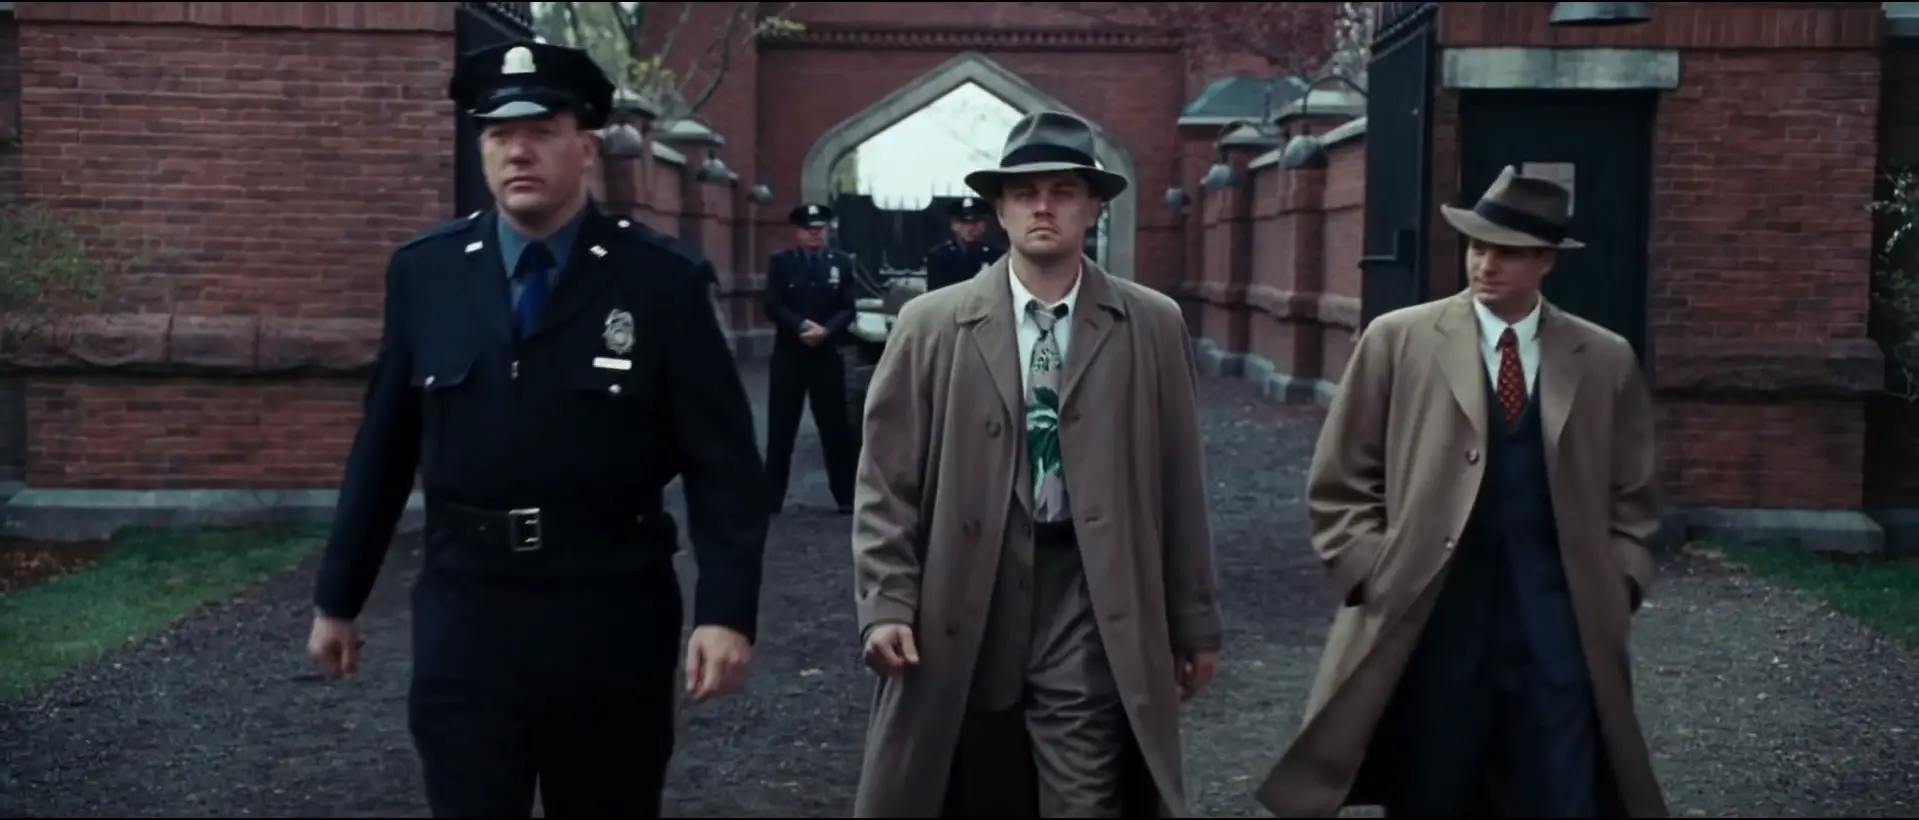 Shutter Island Torrent: A Comprehensive Guide to Downloading and Watching the Movie